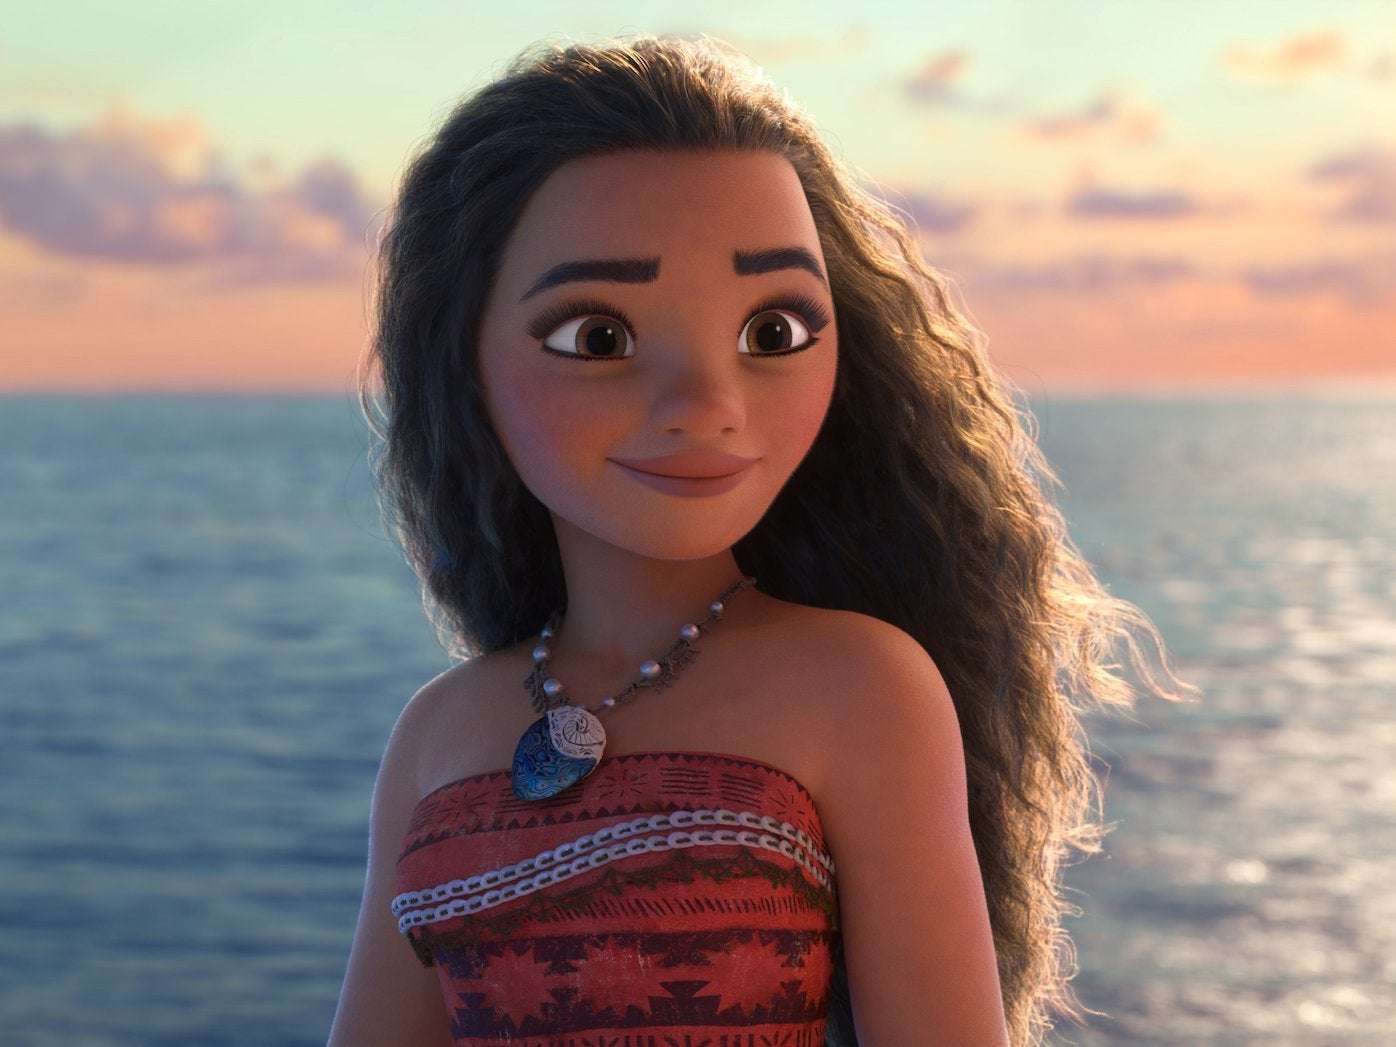 image for Disney's 'Moana' Gets Renamed 'Oceania' In Italy: Turns Out Famous Porn Star Has Same Name